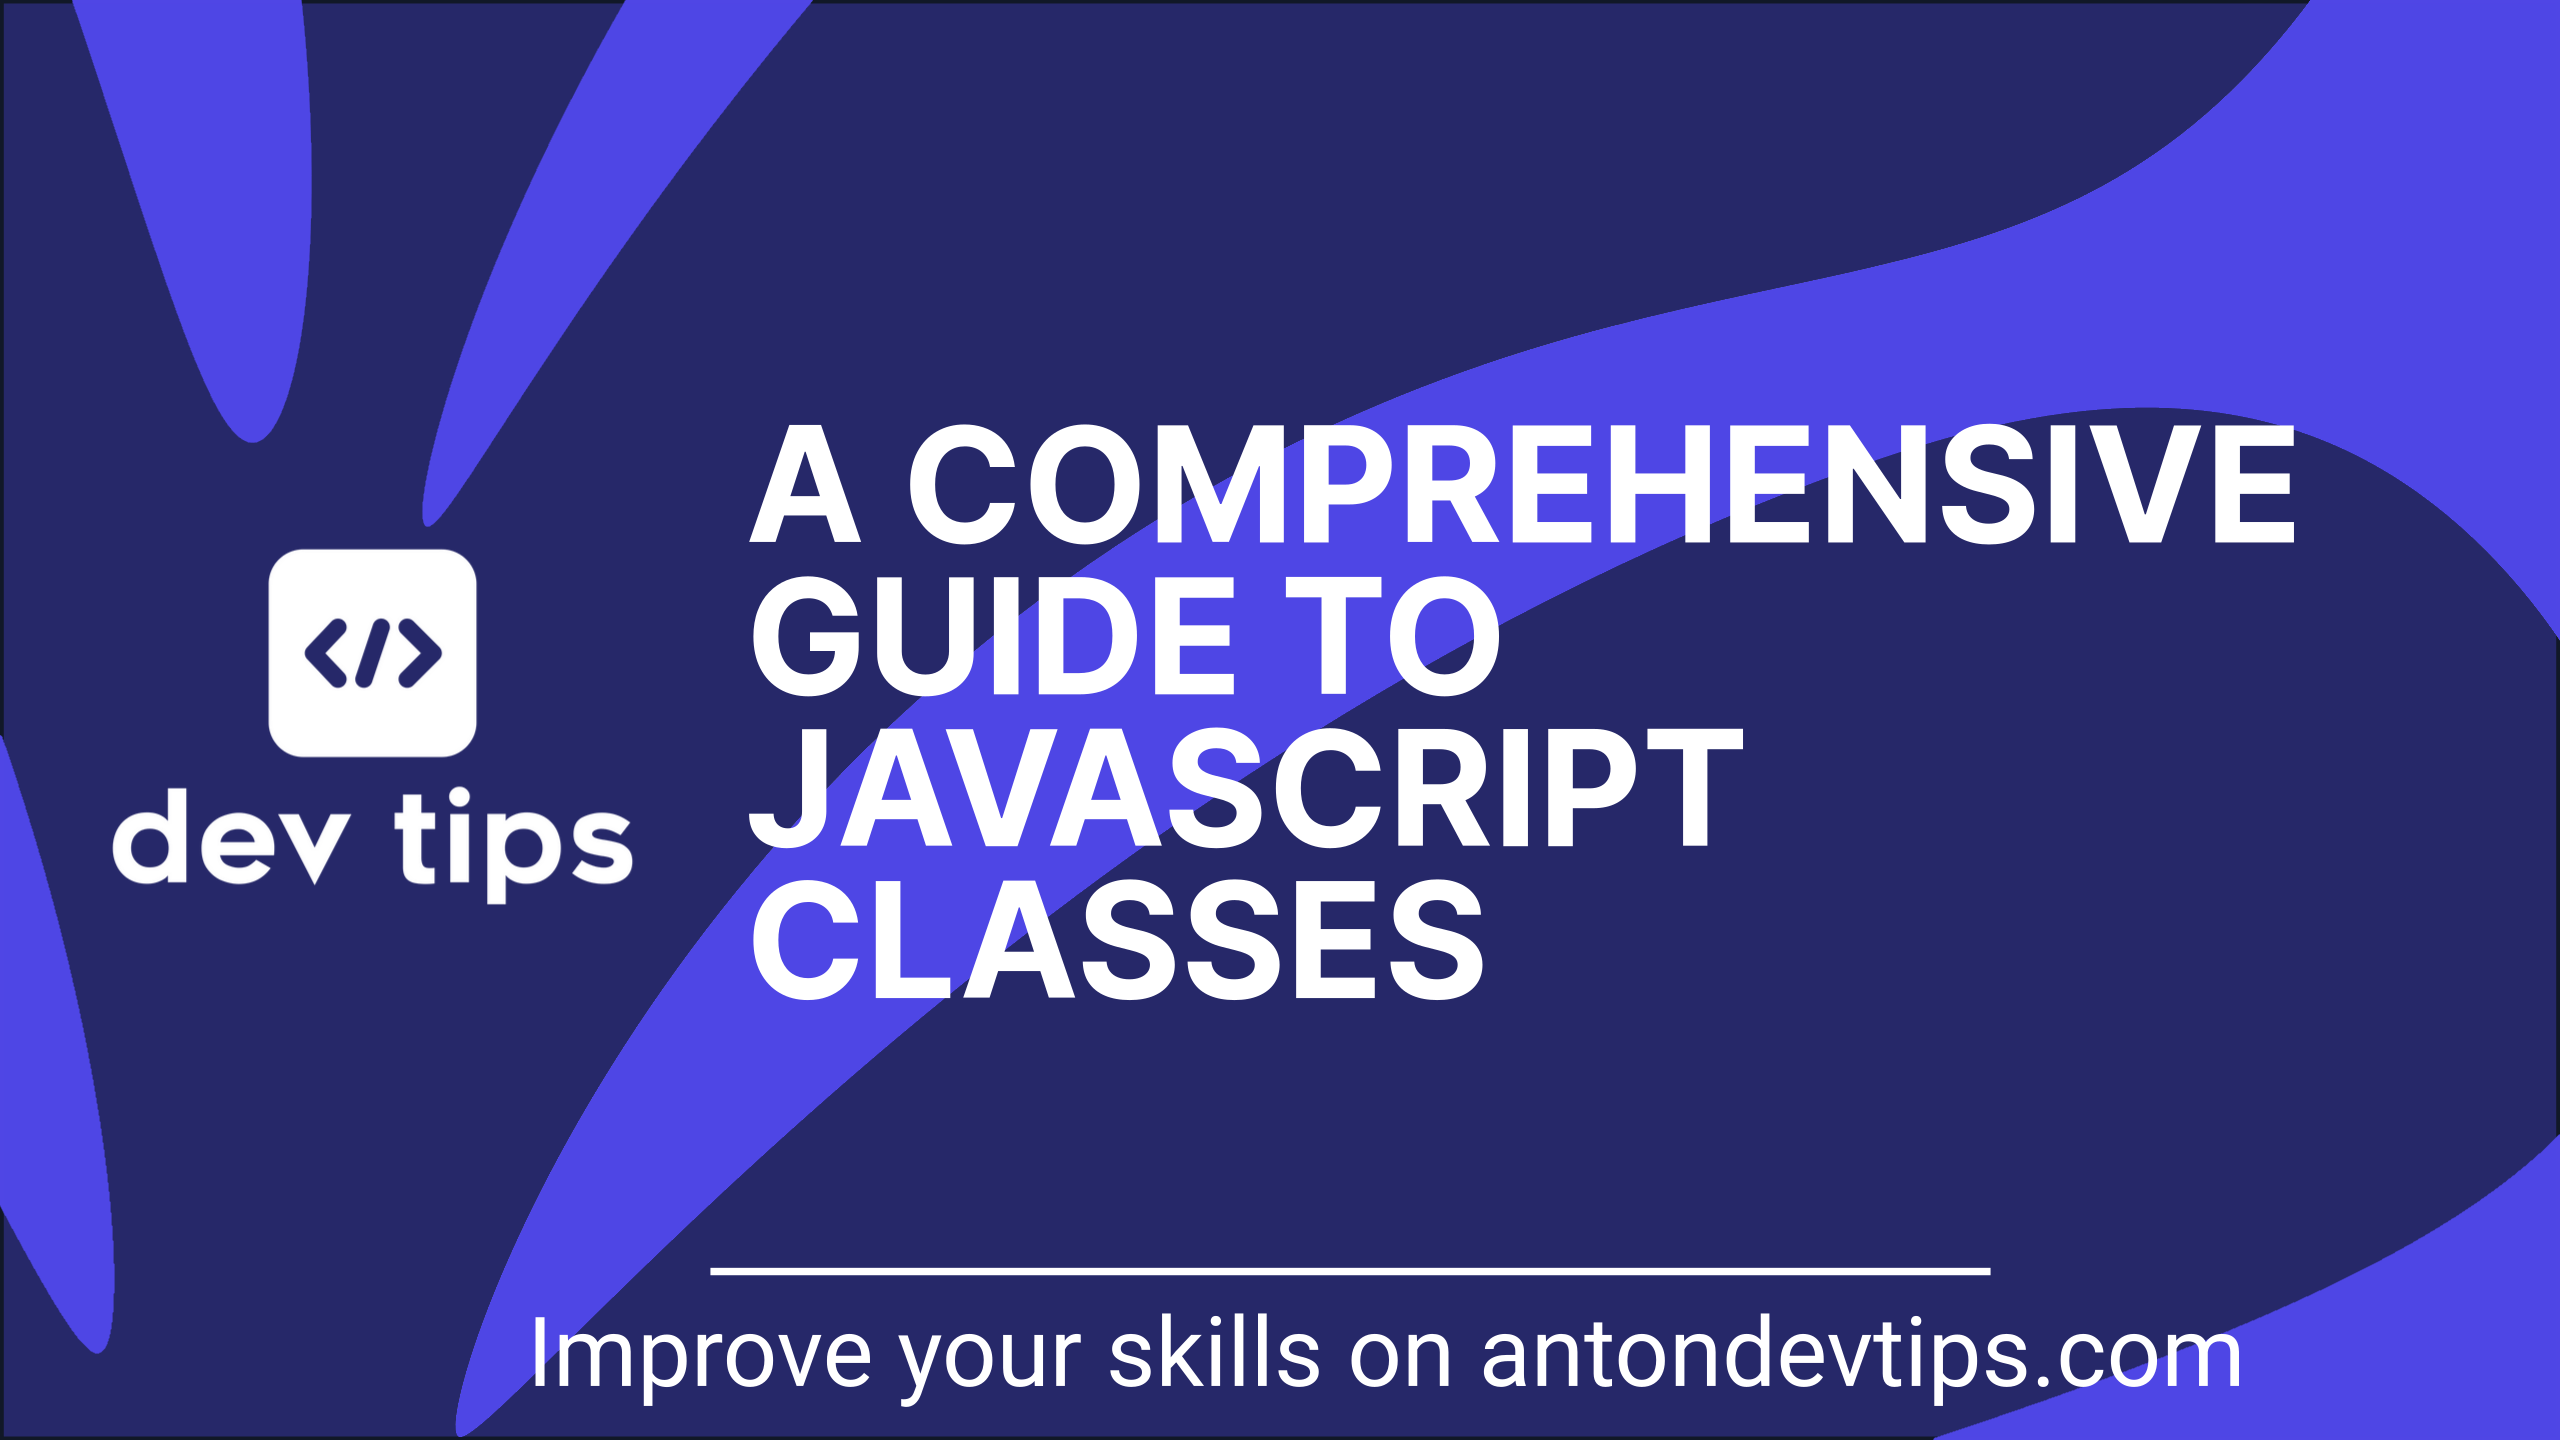 A Comprehensive Guide to JavaScript Classes